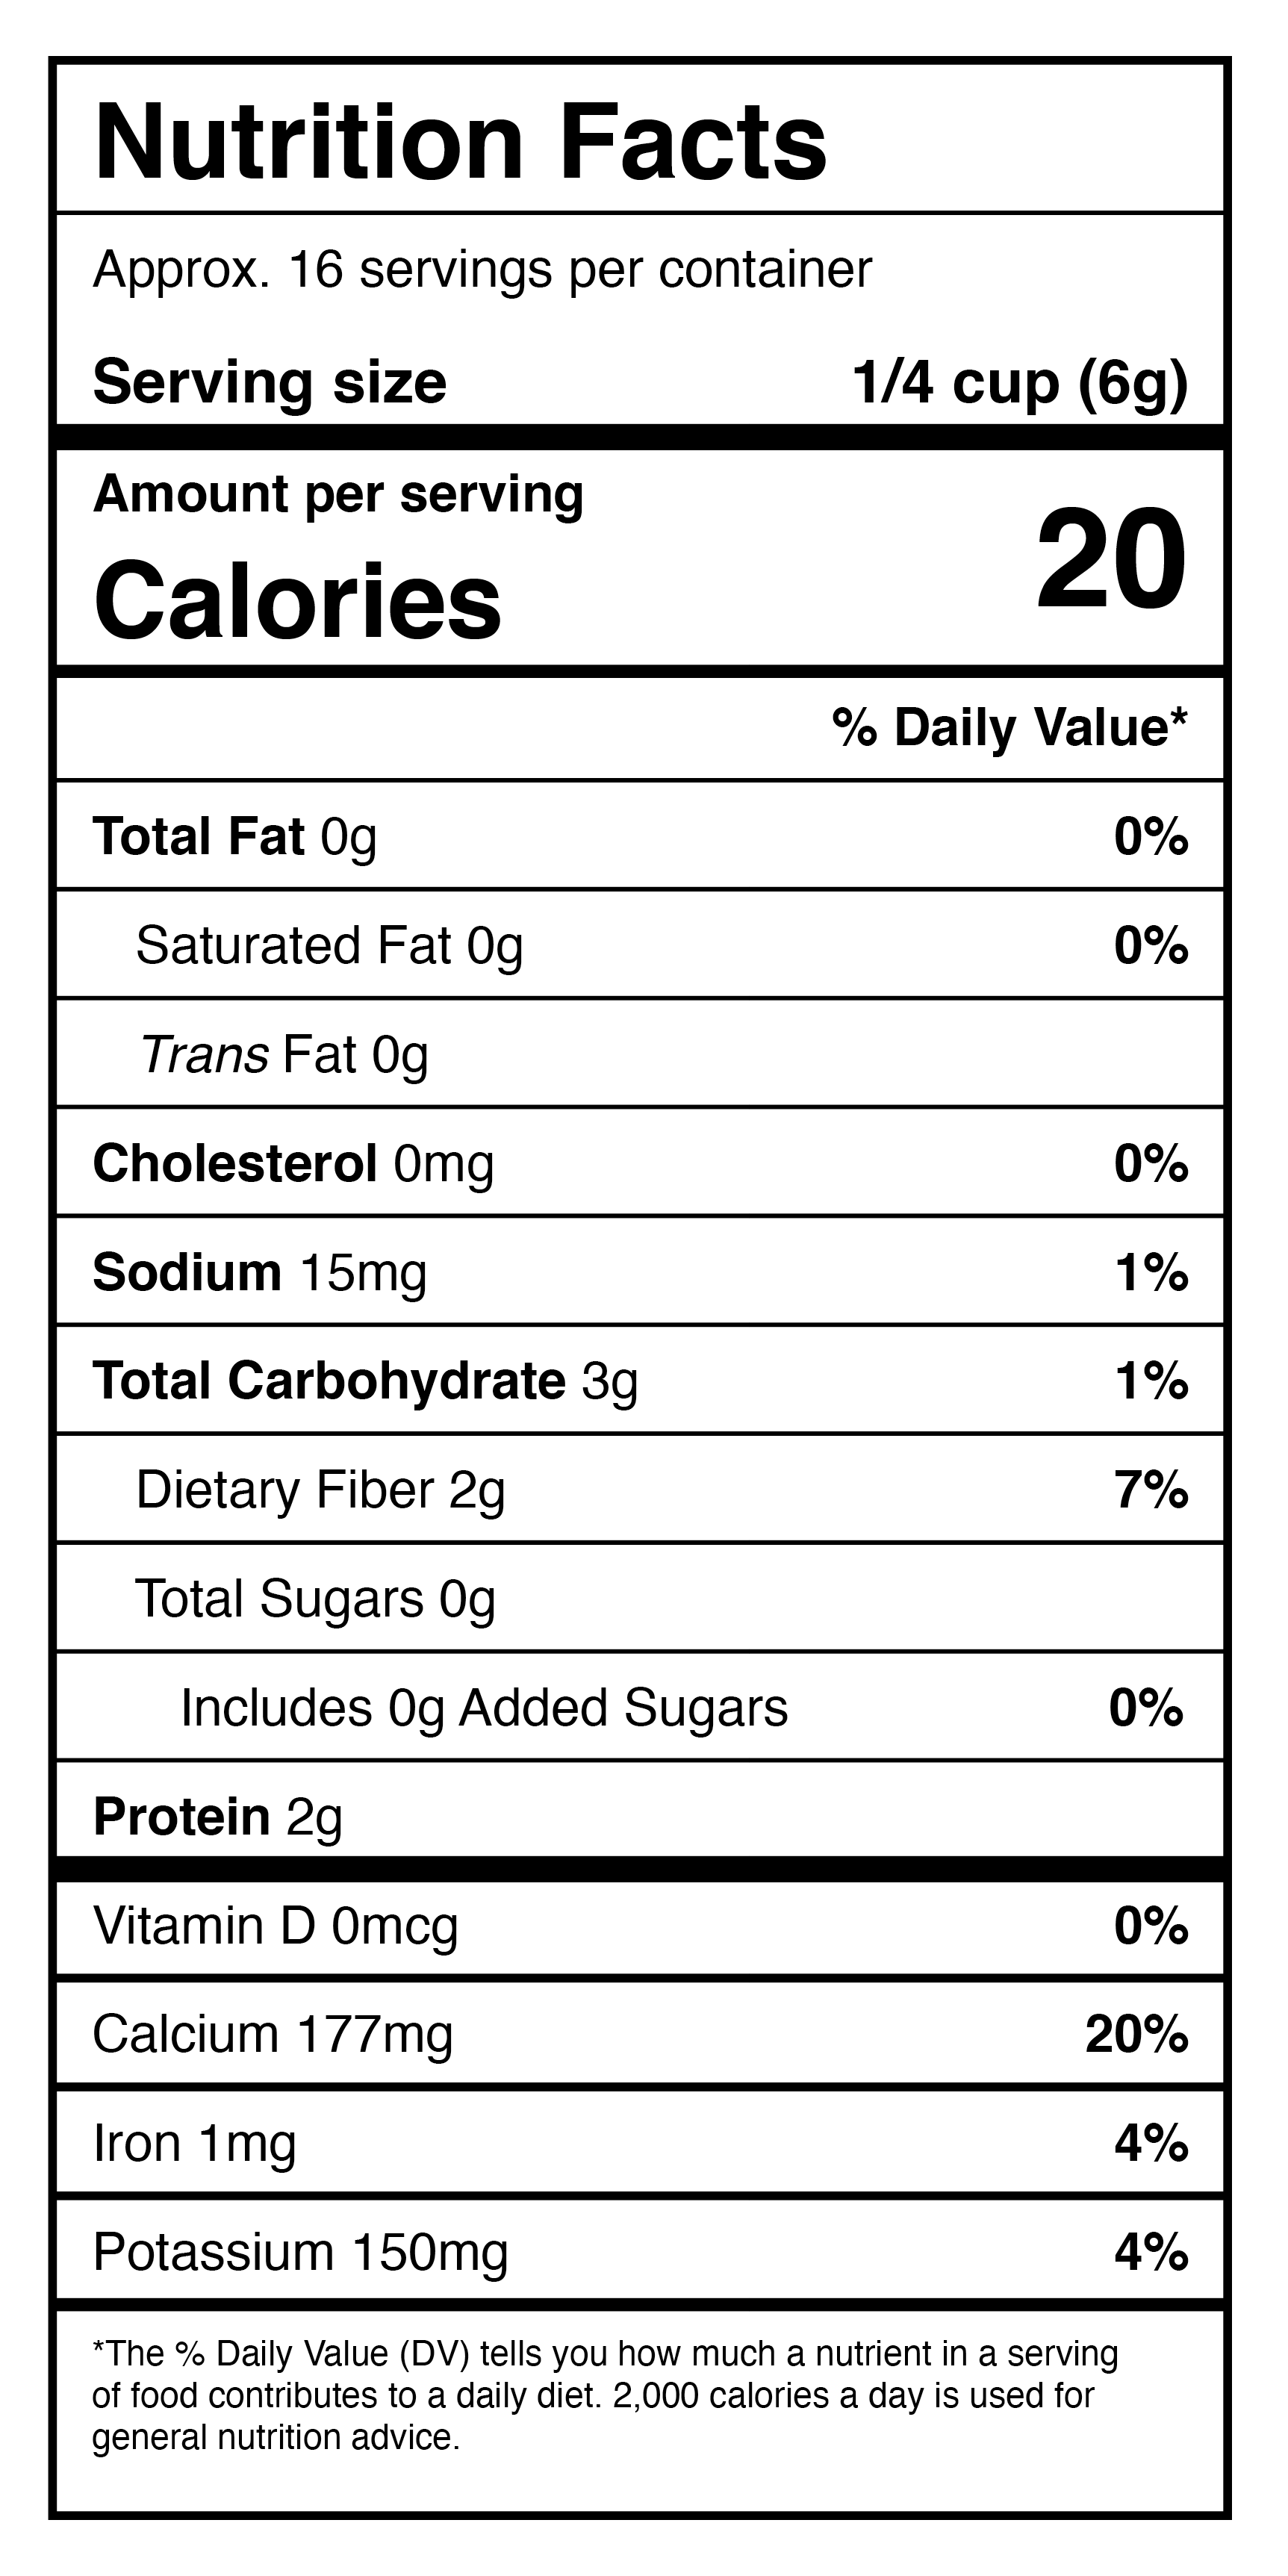 A nutrition label for a protein bar.